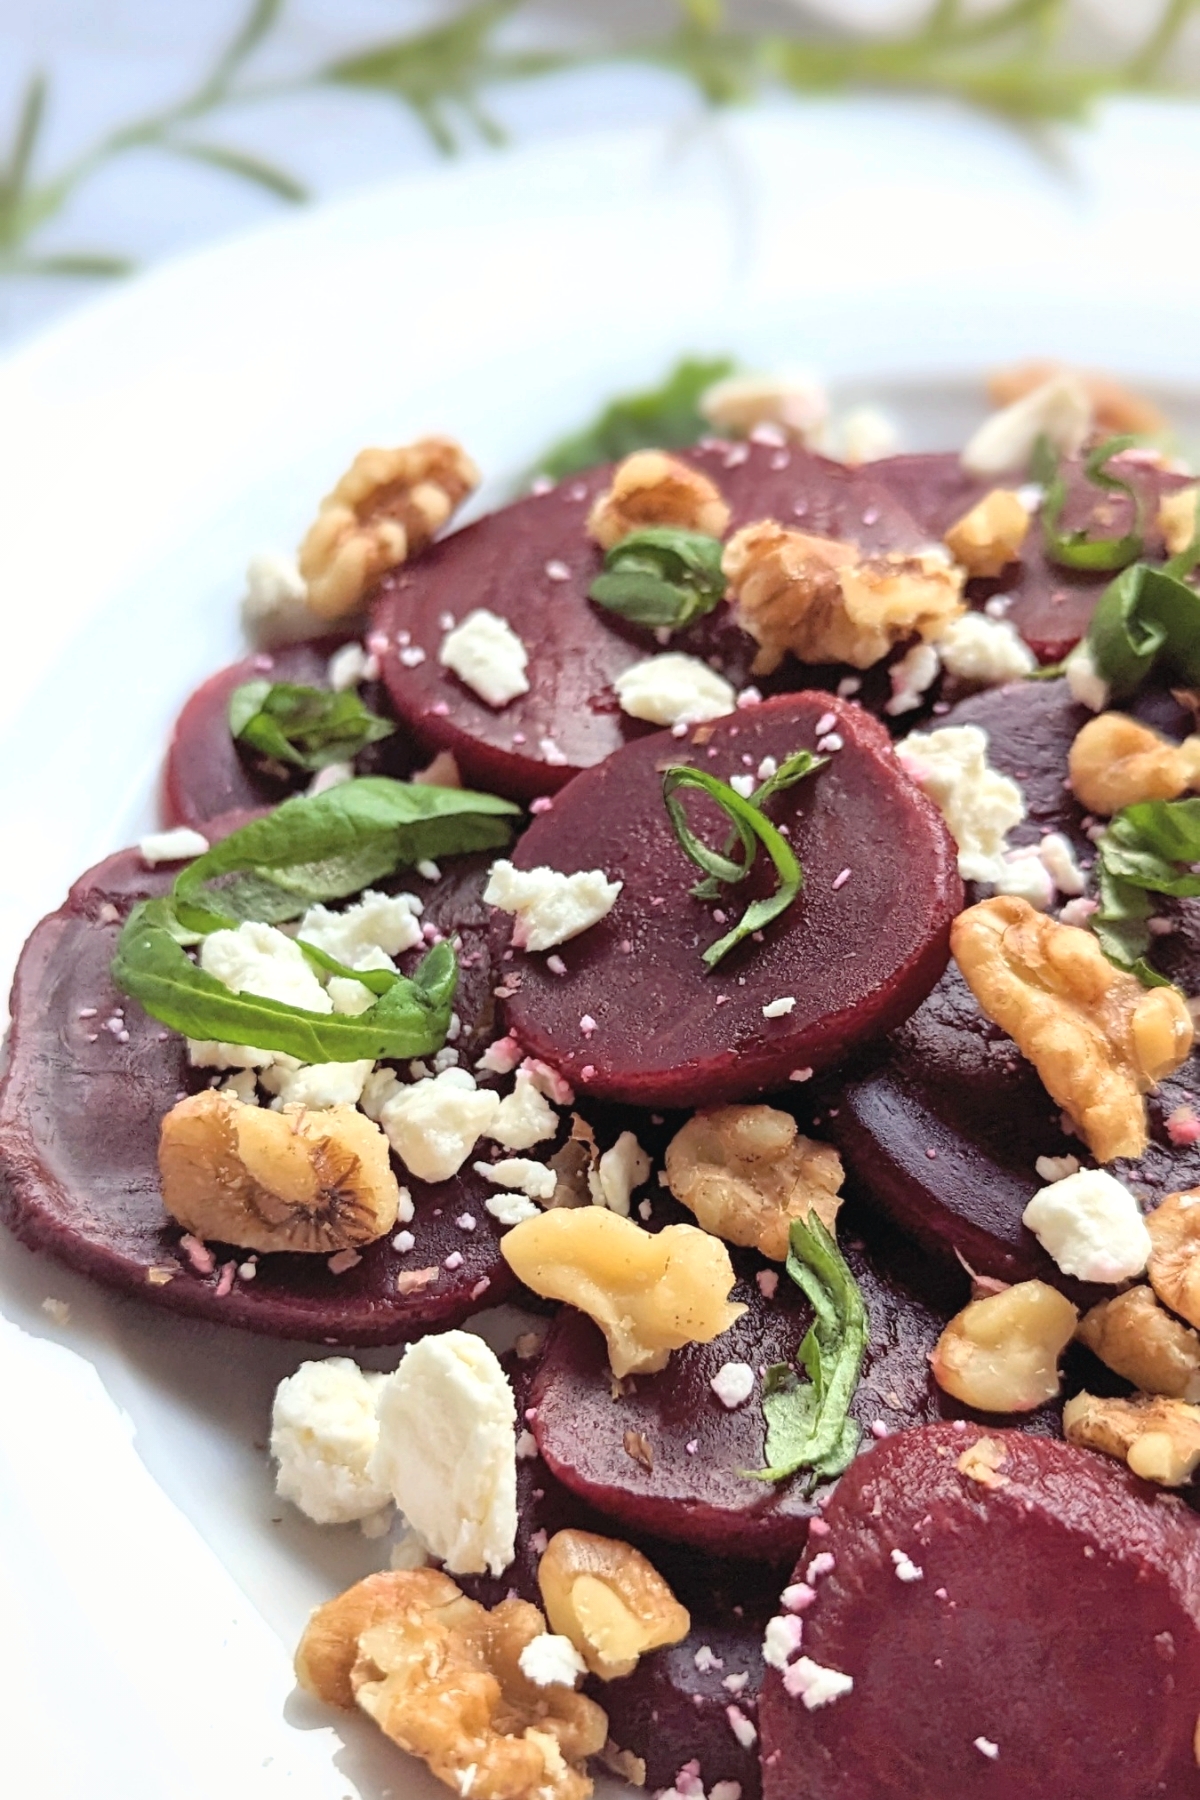 feta beet salad recipe with walnuts healthy beet salads no cook salads without lettuce spinach or kale recipes no lettuce salads fancy salad ideas for christmas